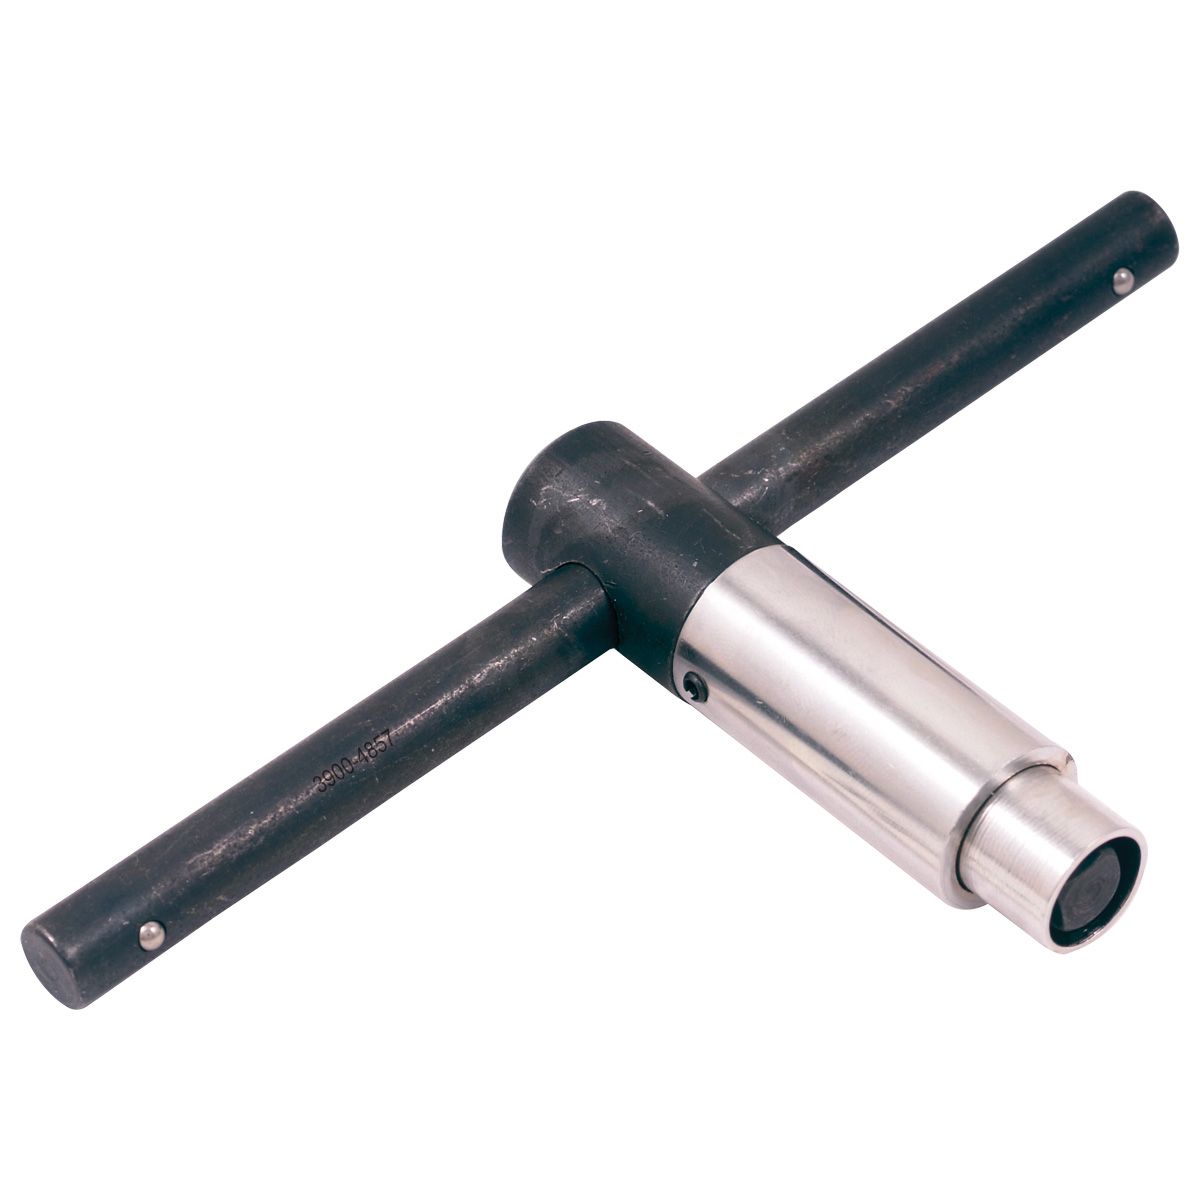 1/2" SQUARE HEAD SELF-EJECTING LATHE CHUCK WRENCH (3900-4855)